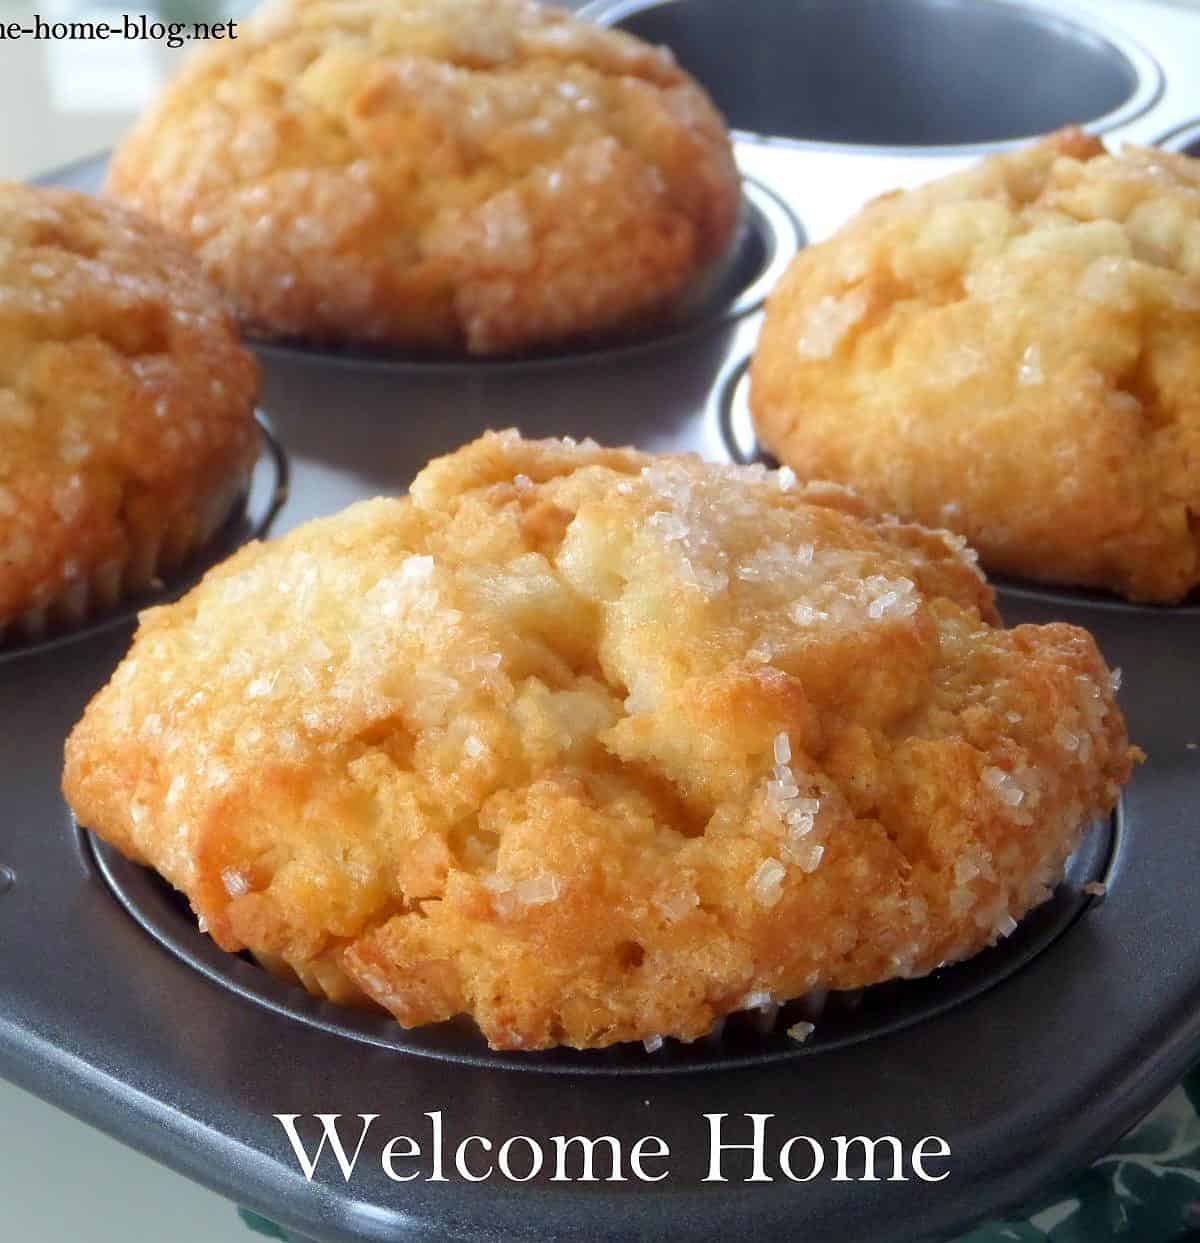  These muffins are the perfect treat to cozy up with on a chilly day.